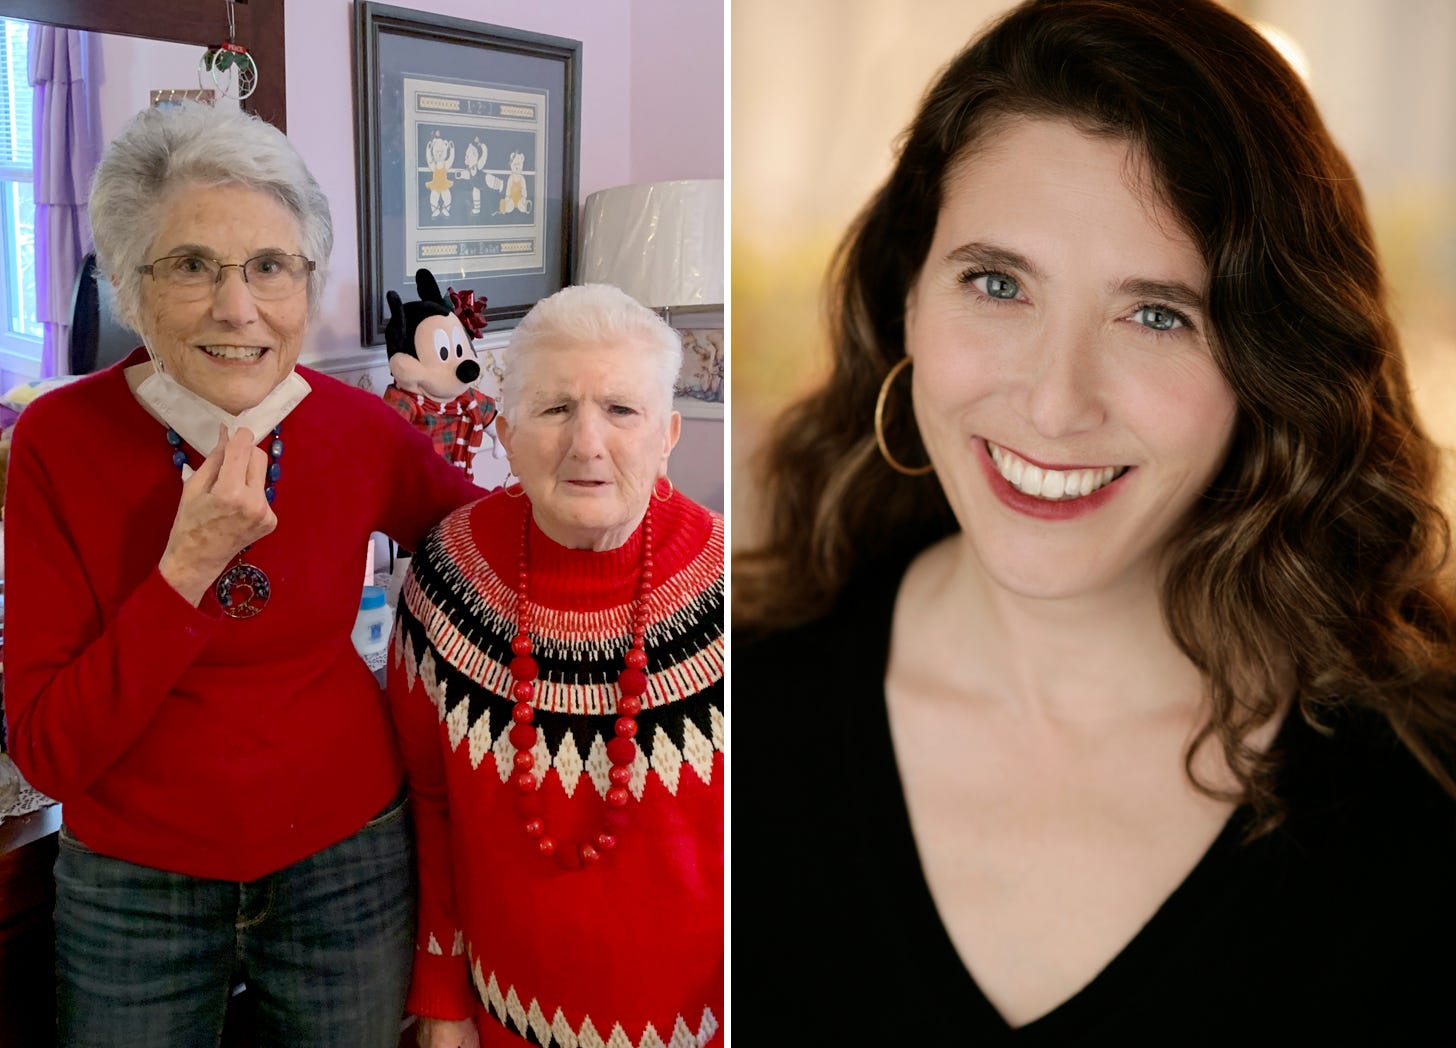 Two photos side by side. On the left: Jennifer Senior’s mother Rona poses with her sister, Adele, at Adele’s group home in upstate New York. On the right: a headshot of Atlantic staff writer Jennifer Senior.